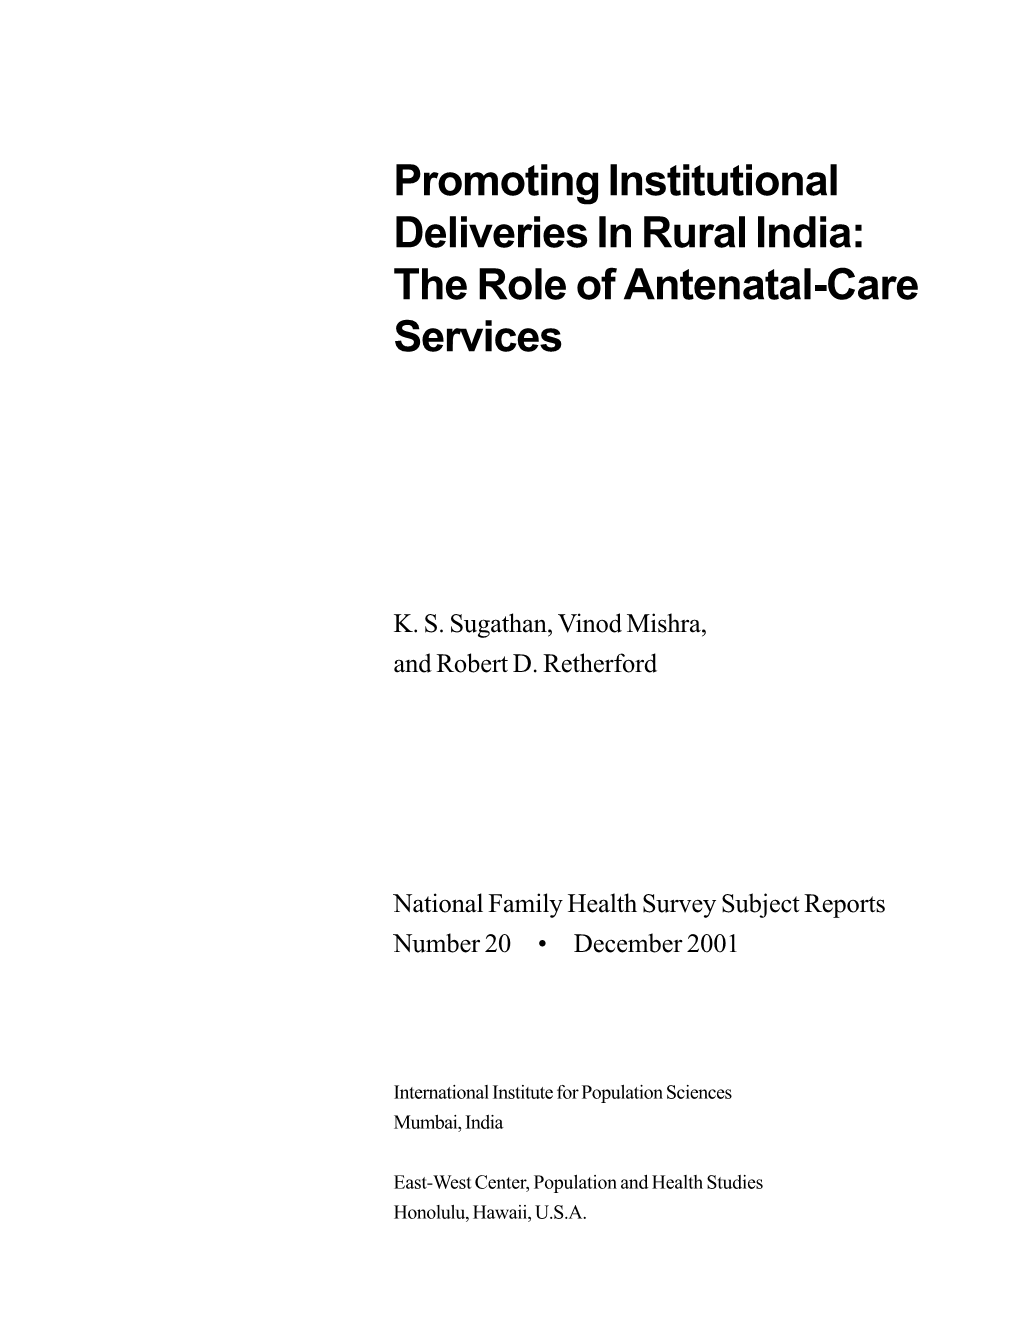 Promoting Institutional Deliveries in Rural India: the Role of Antenatal-Care Services